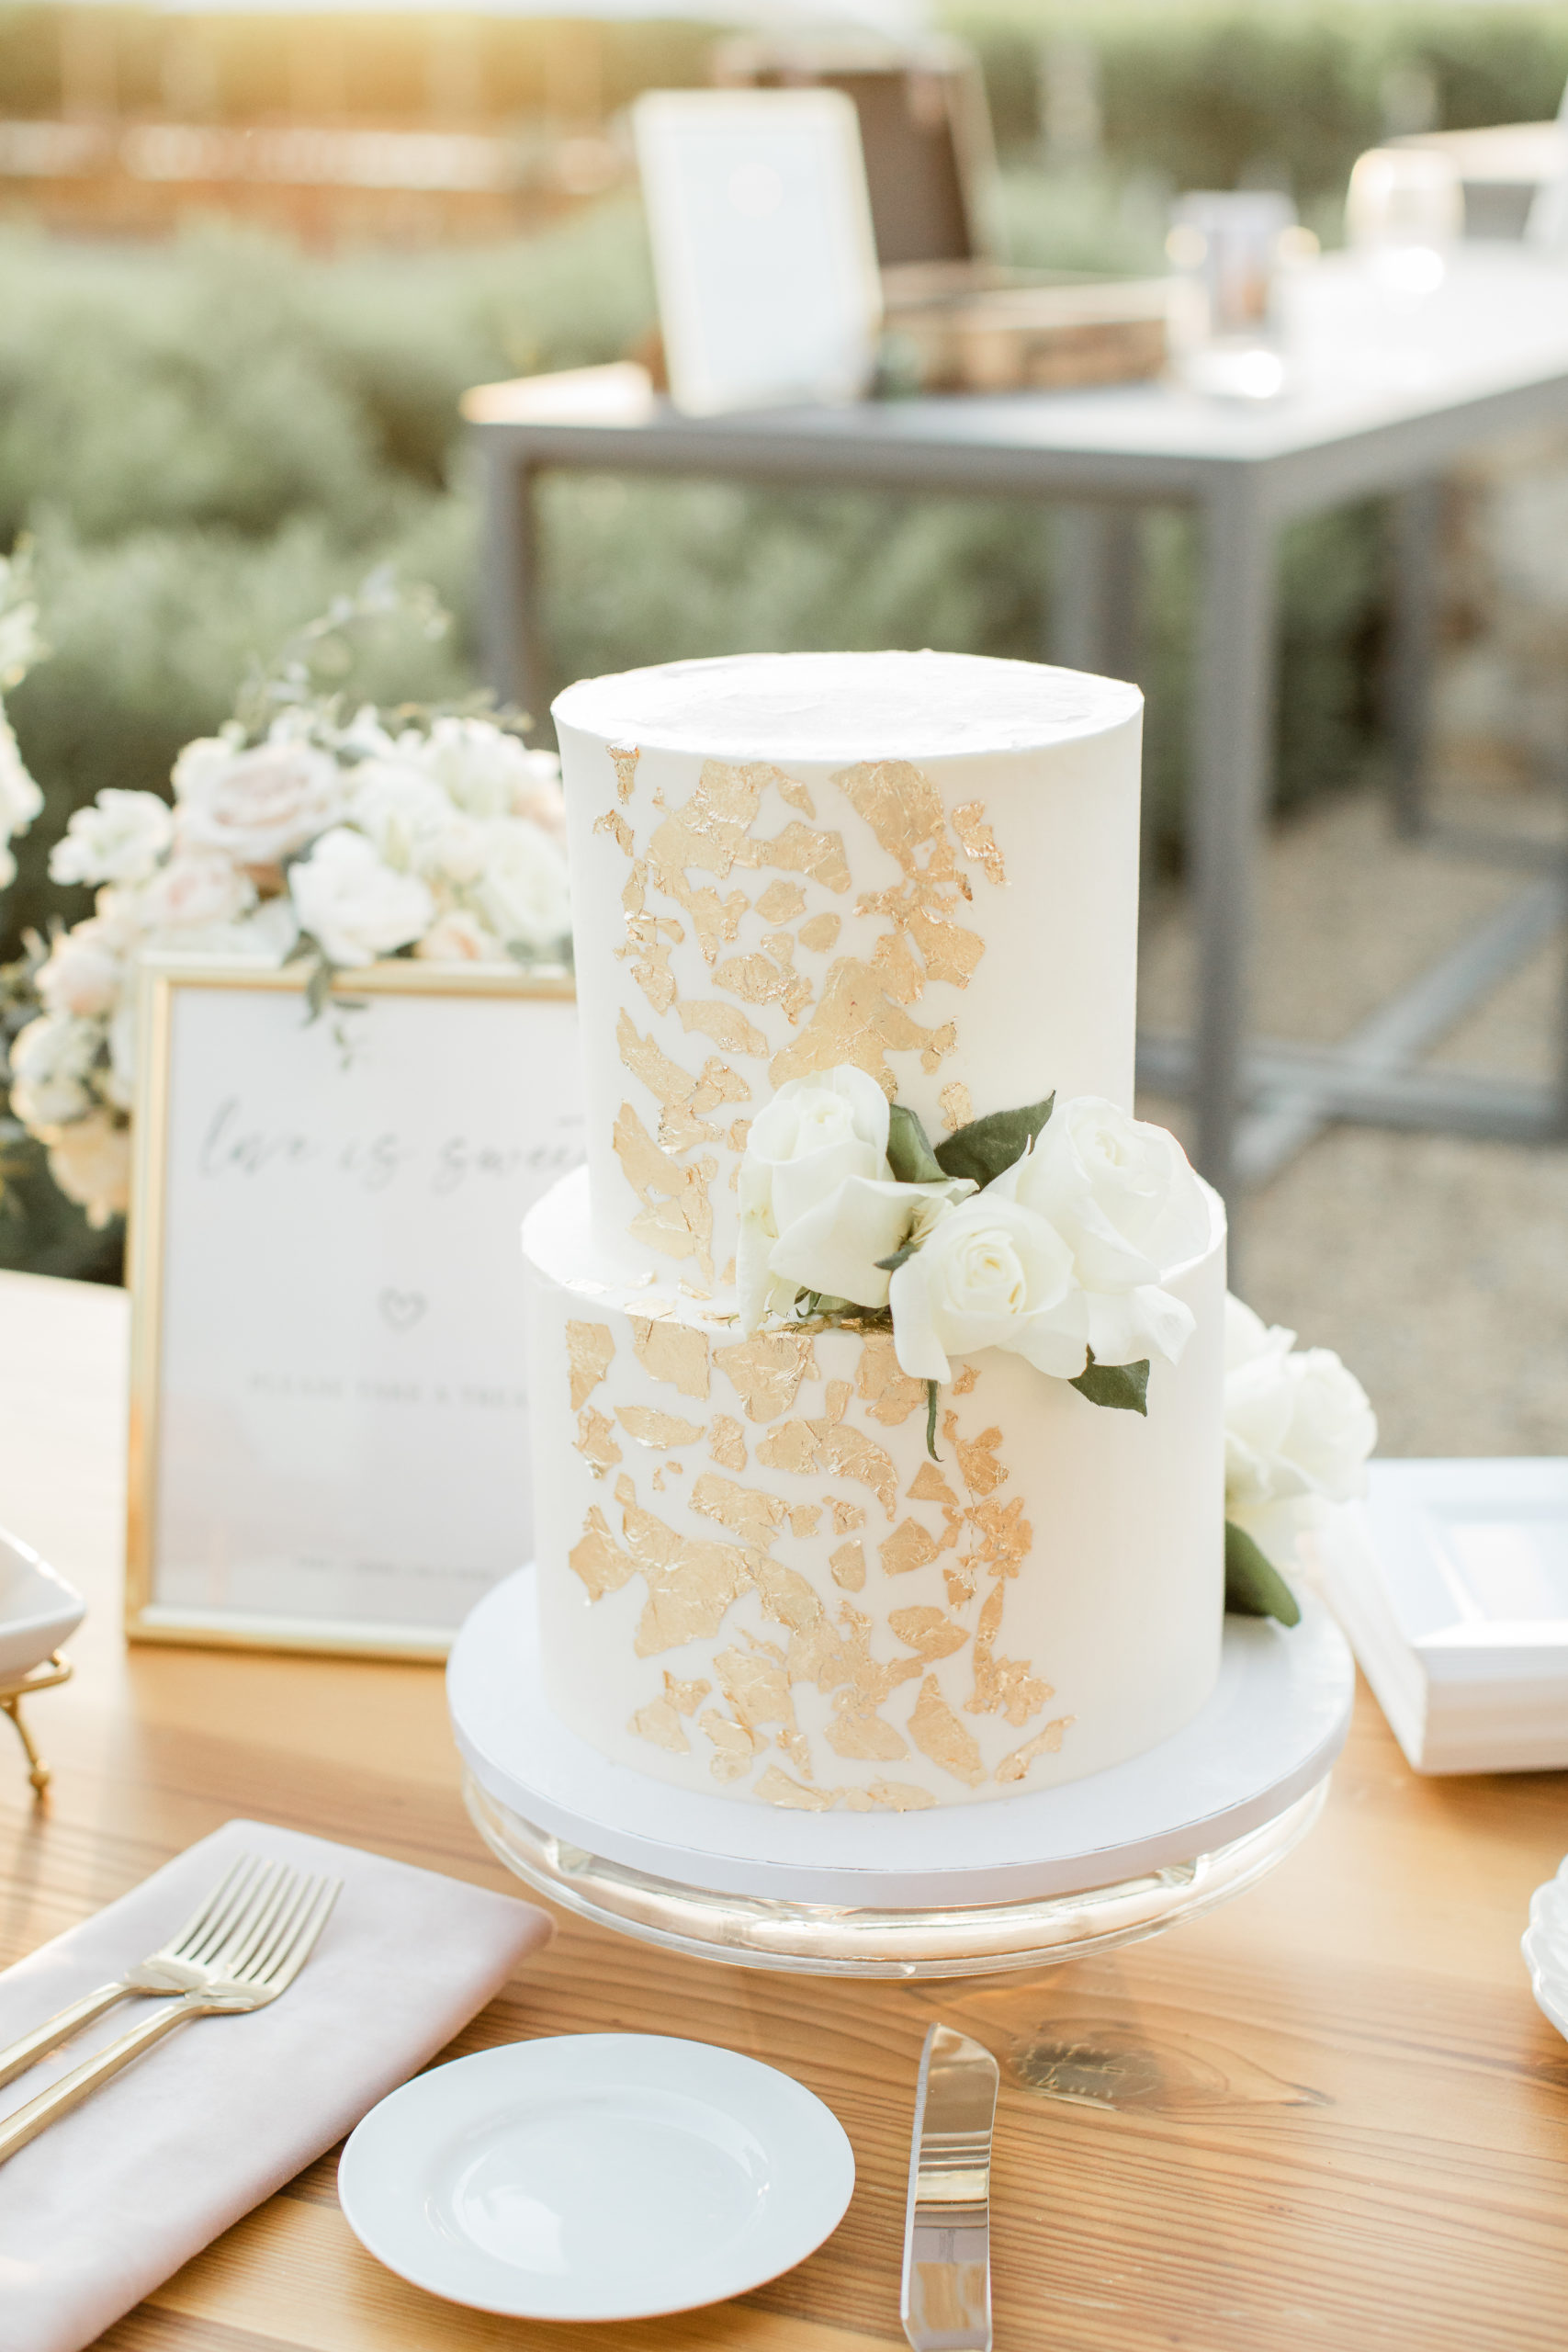 A white wedding cake with gold accents and white roses placed on the side.